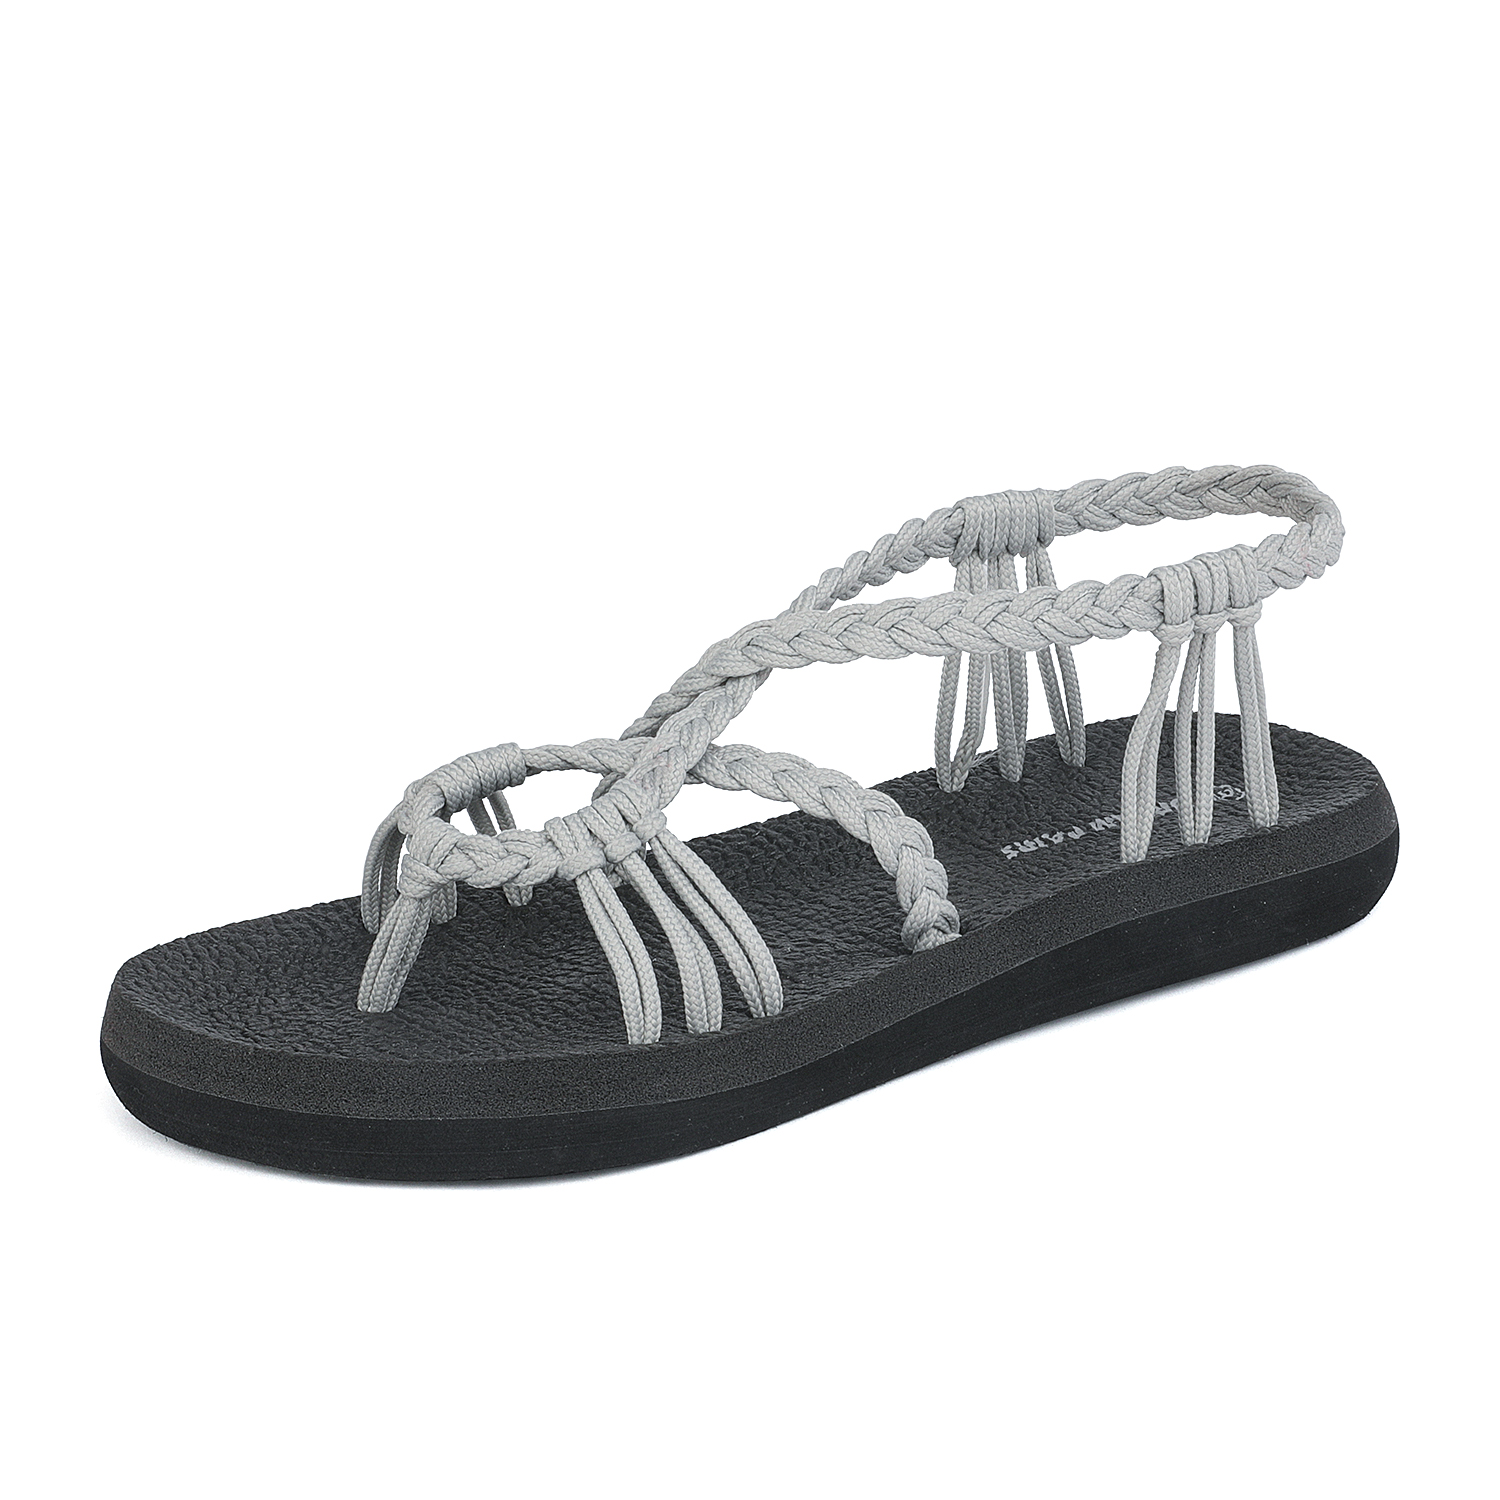 DREAM PAIRS Women's Flat Sandals Strap Yoga Casual Lightweight Beach Shoes GREY ATHENA_12 size 11 - image 1 of 4